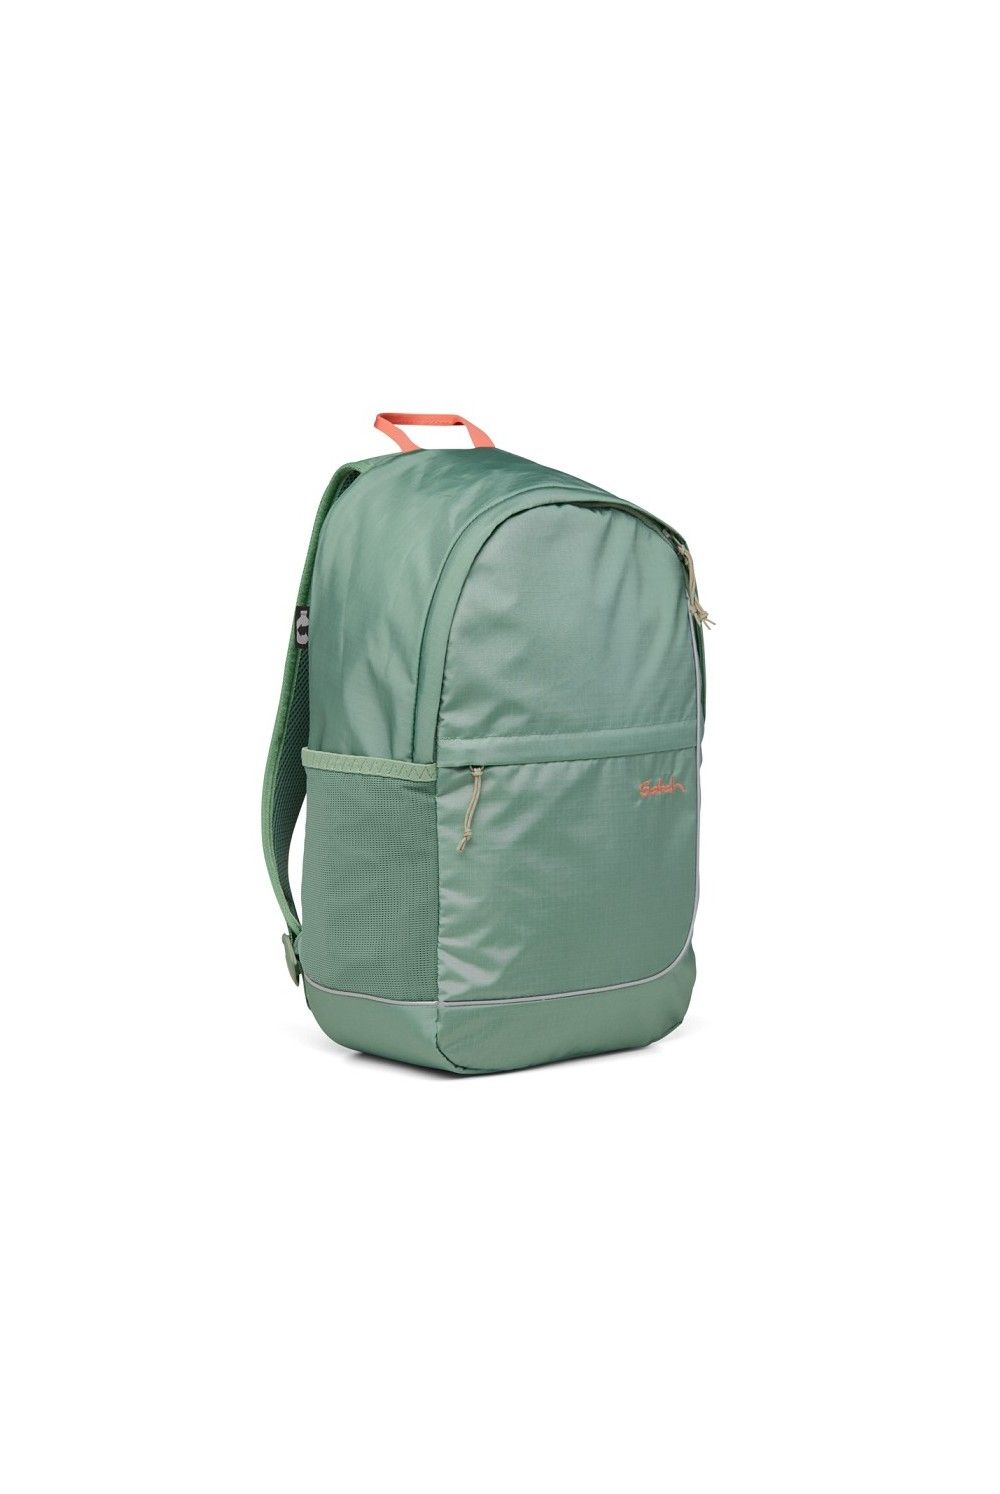 Satch Backpack Fly Ripstop Green